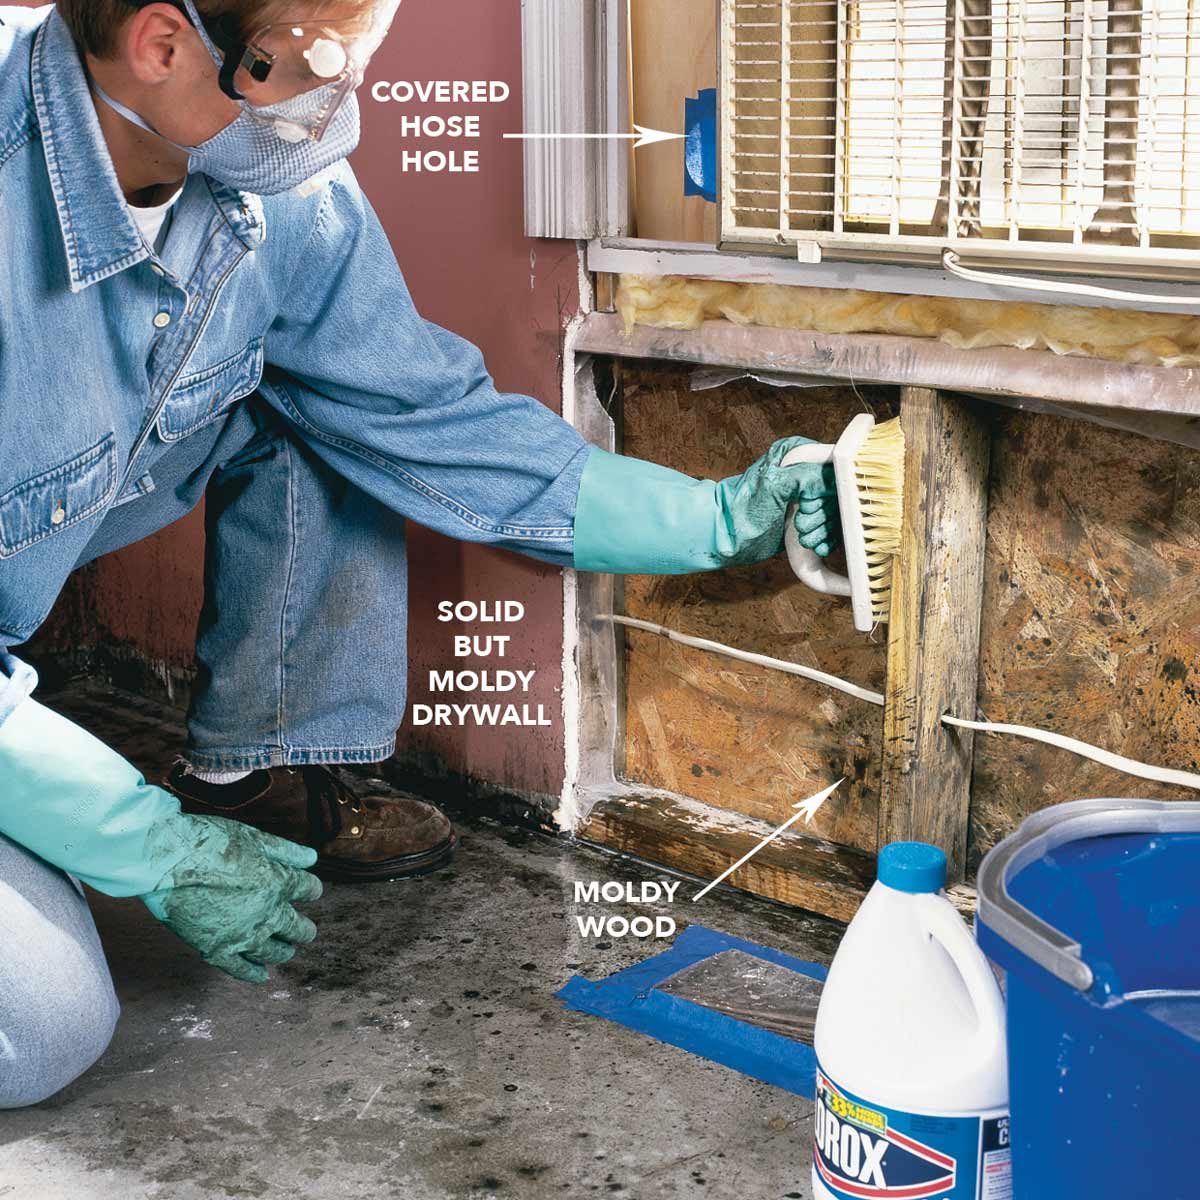 How To Remove Mold: Mold Remediation (DIY)